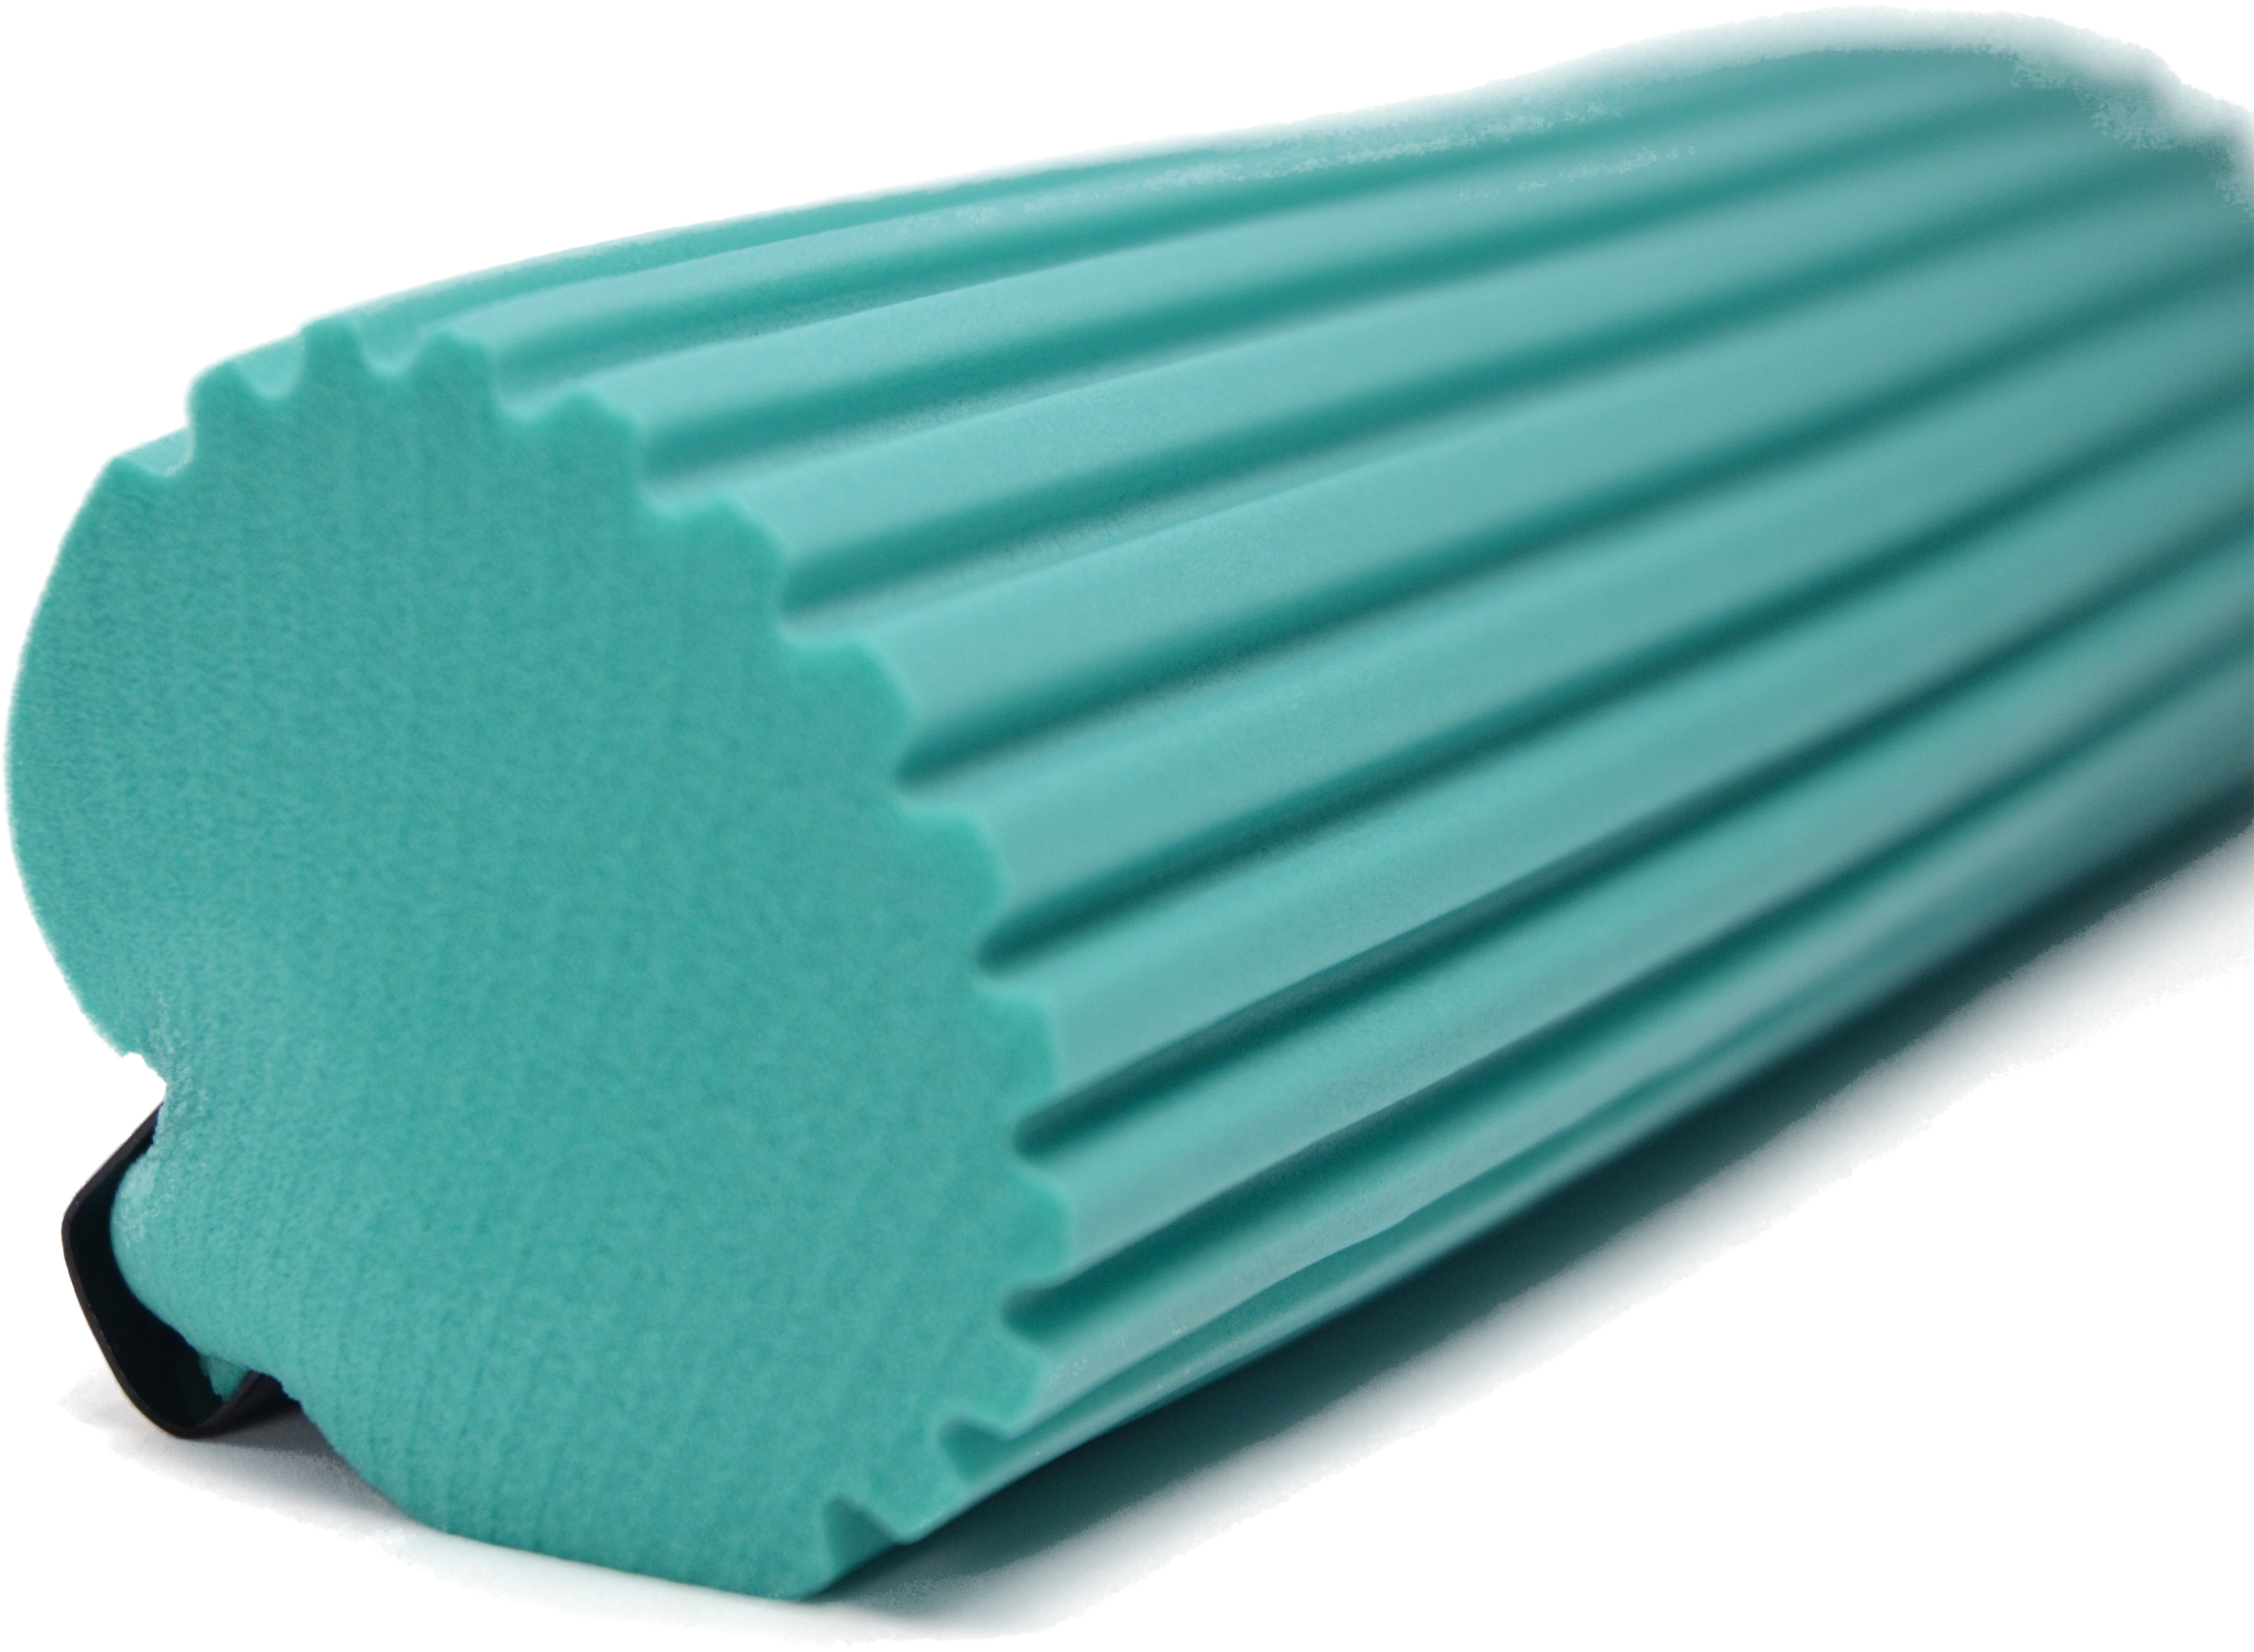 The Super Standard 11" Double Roller PVA Sponge Mop Set (Mop and 1 Extra Refill) - image 3 of 5